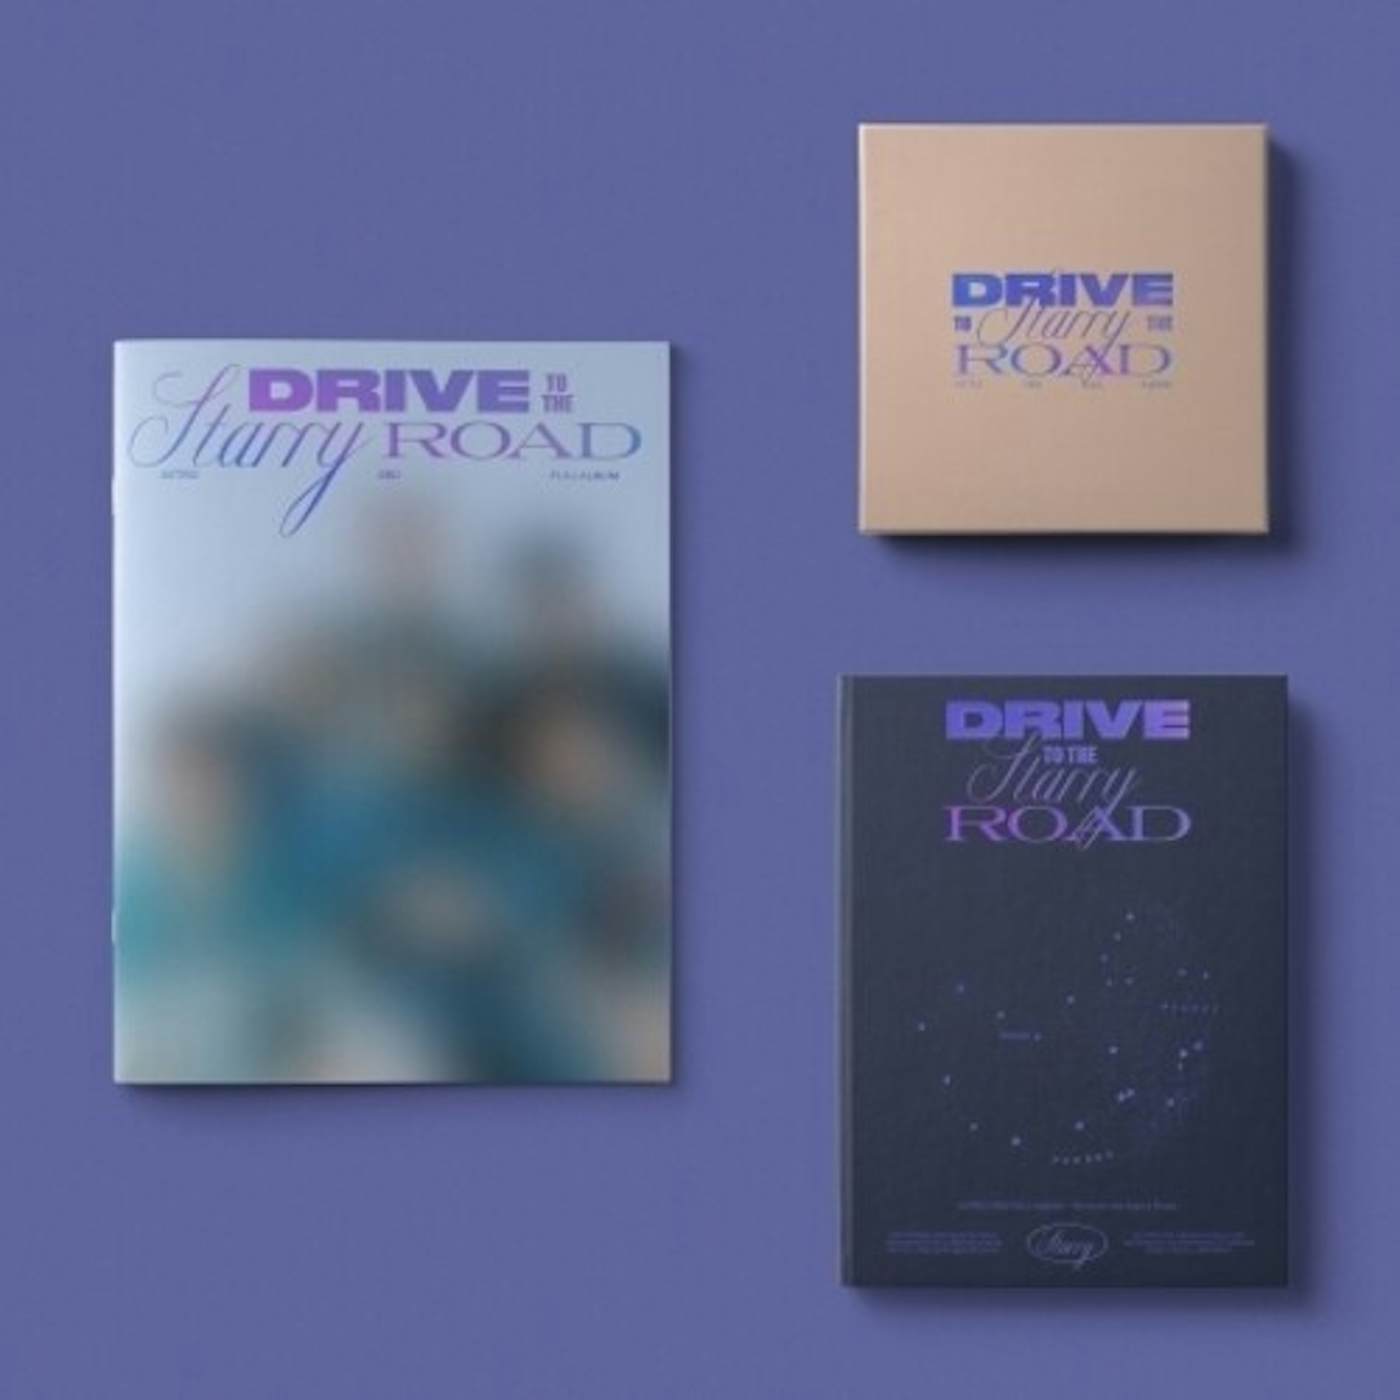 ASTRO DRIVE TO THE STARRY ROAD (DRIVE VERSION) CD